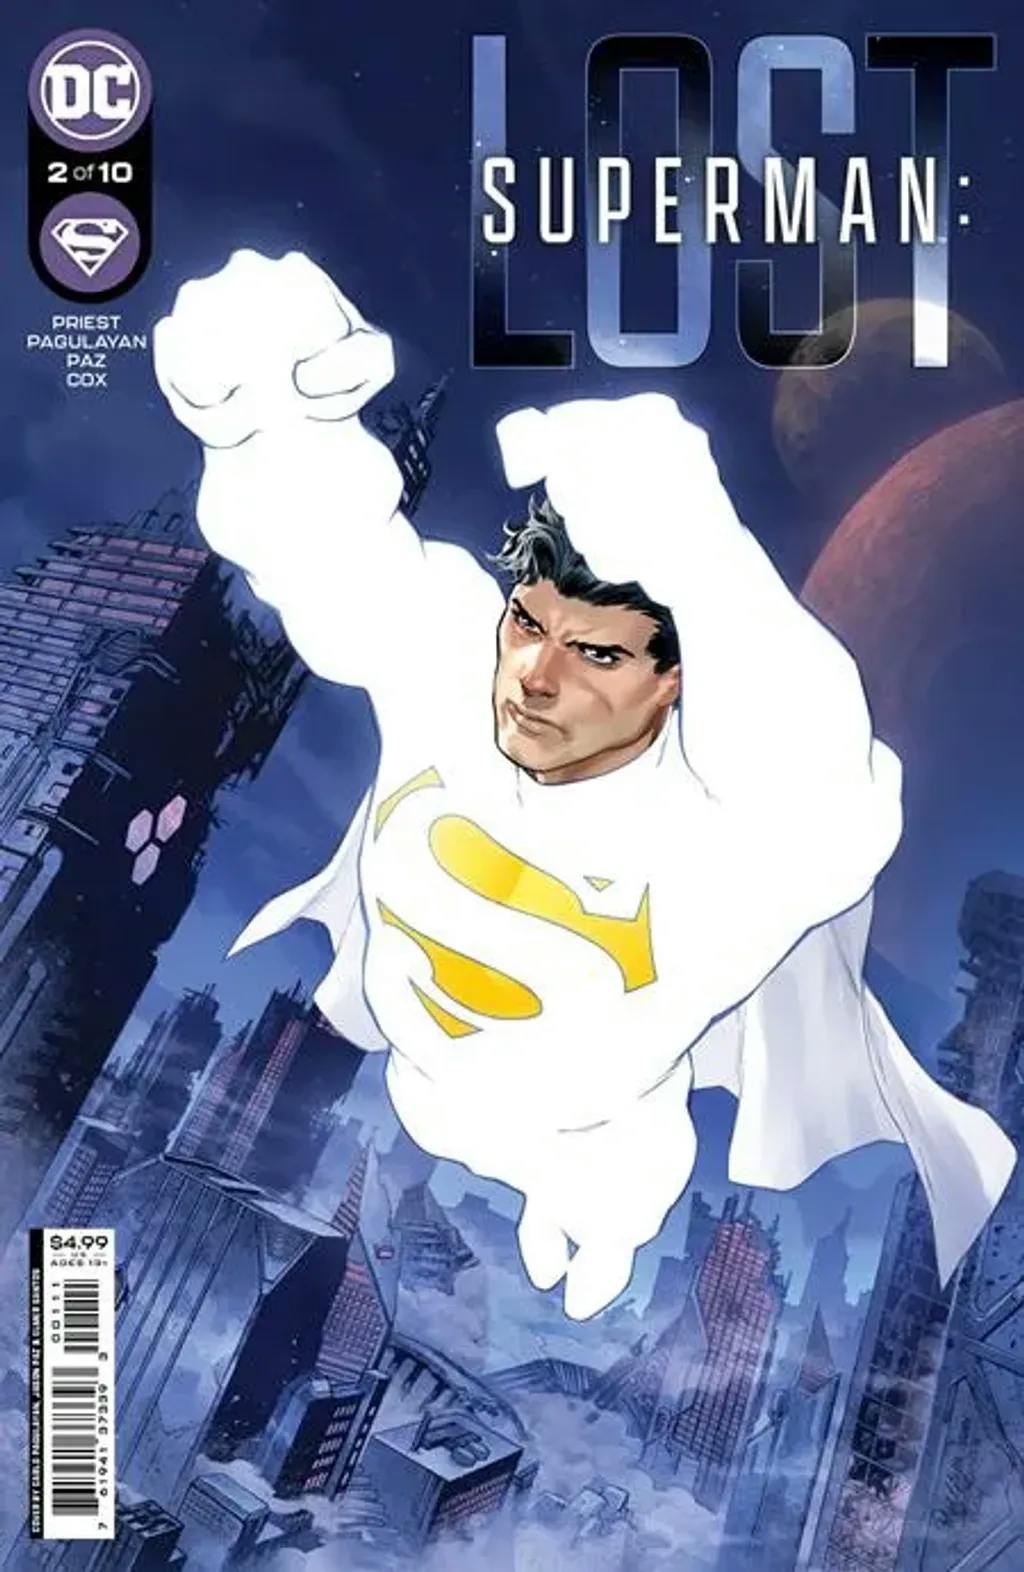 Superman: Lost #2 By Christopher Priest, Carlo Pagulayan, Jason Paz, and Jeromy Cox